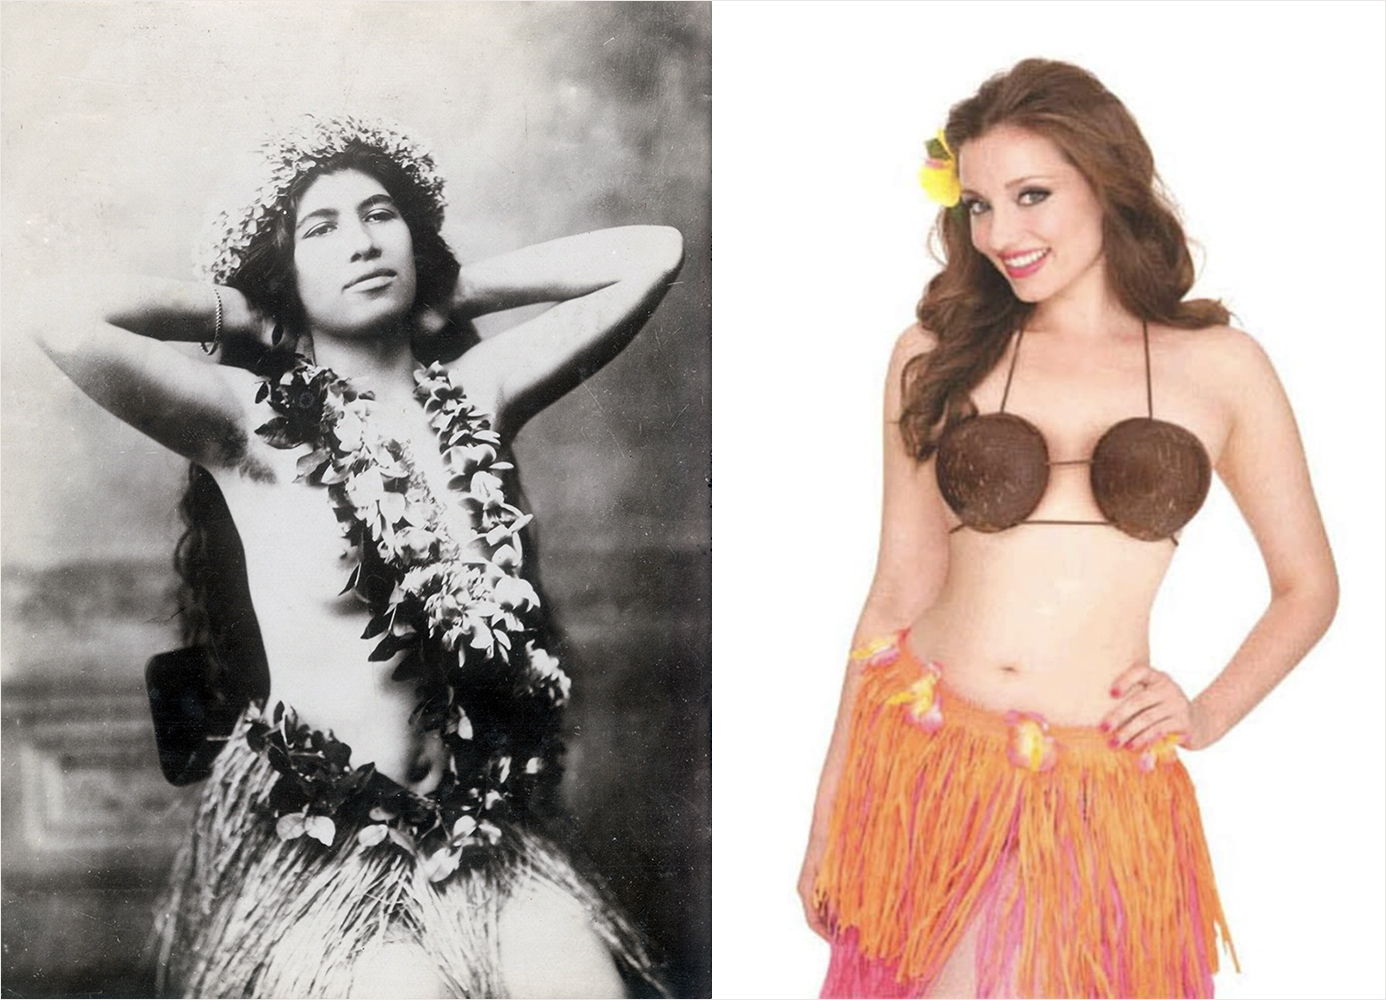 It's time to throw away the coconut bras and grass skirts